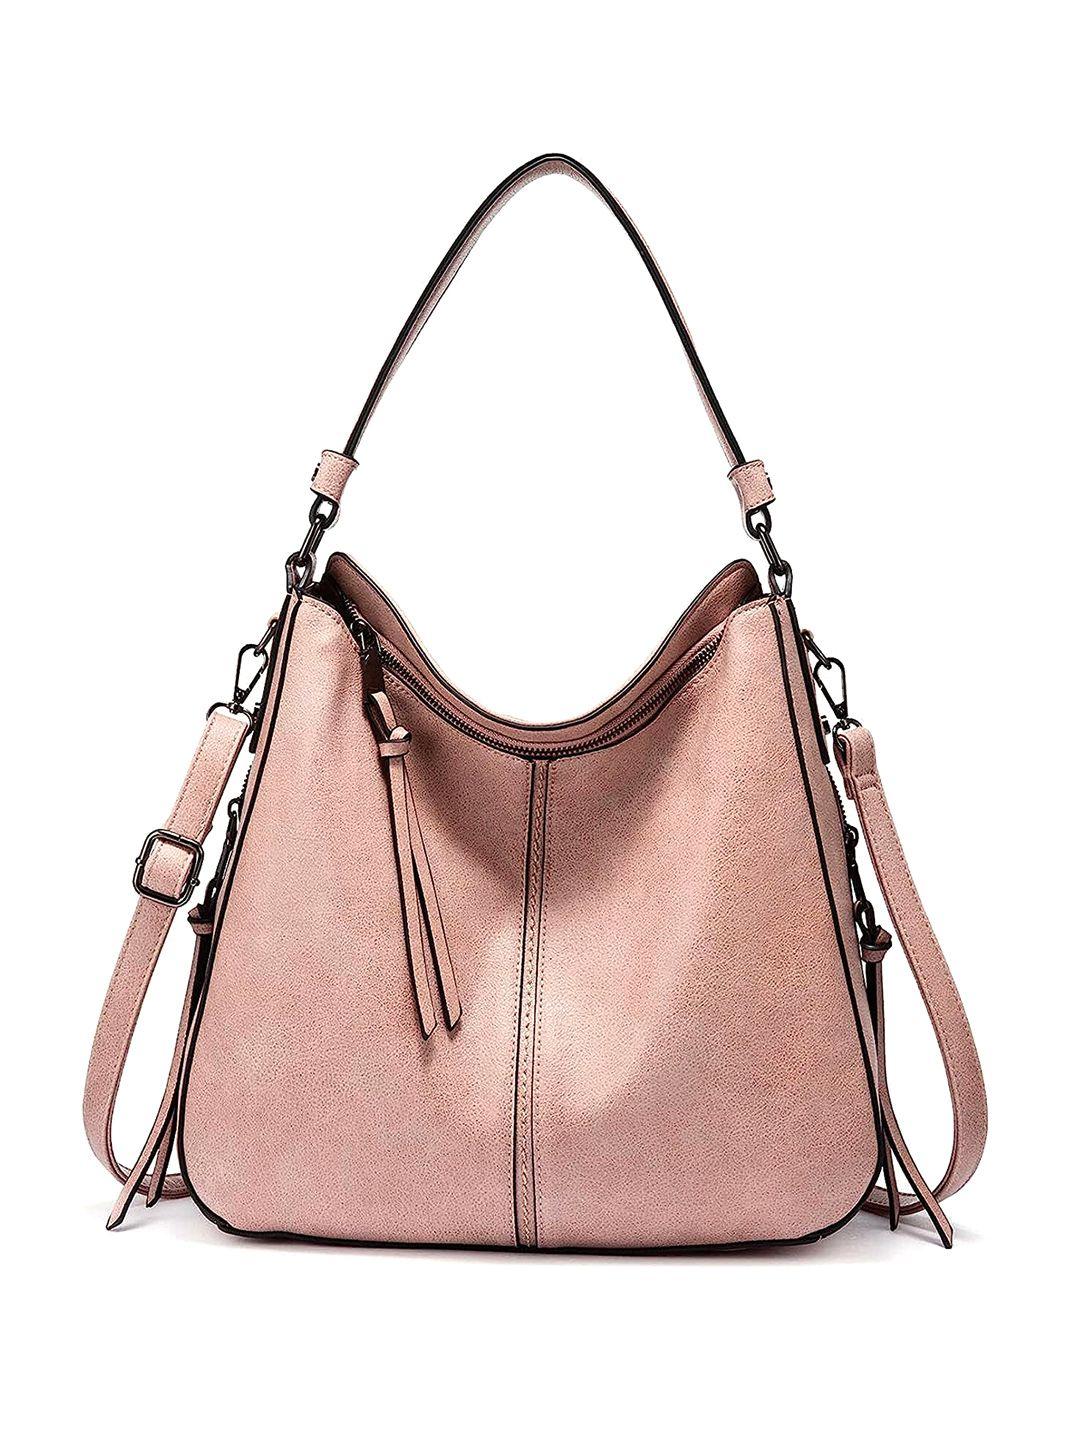 mast & harbour pink textured pu oversized half moon hobo bag with tasselled